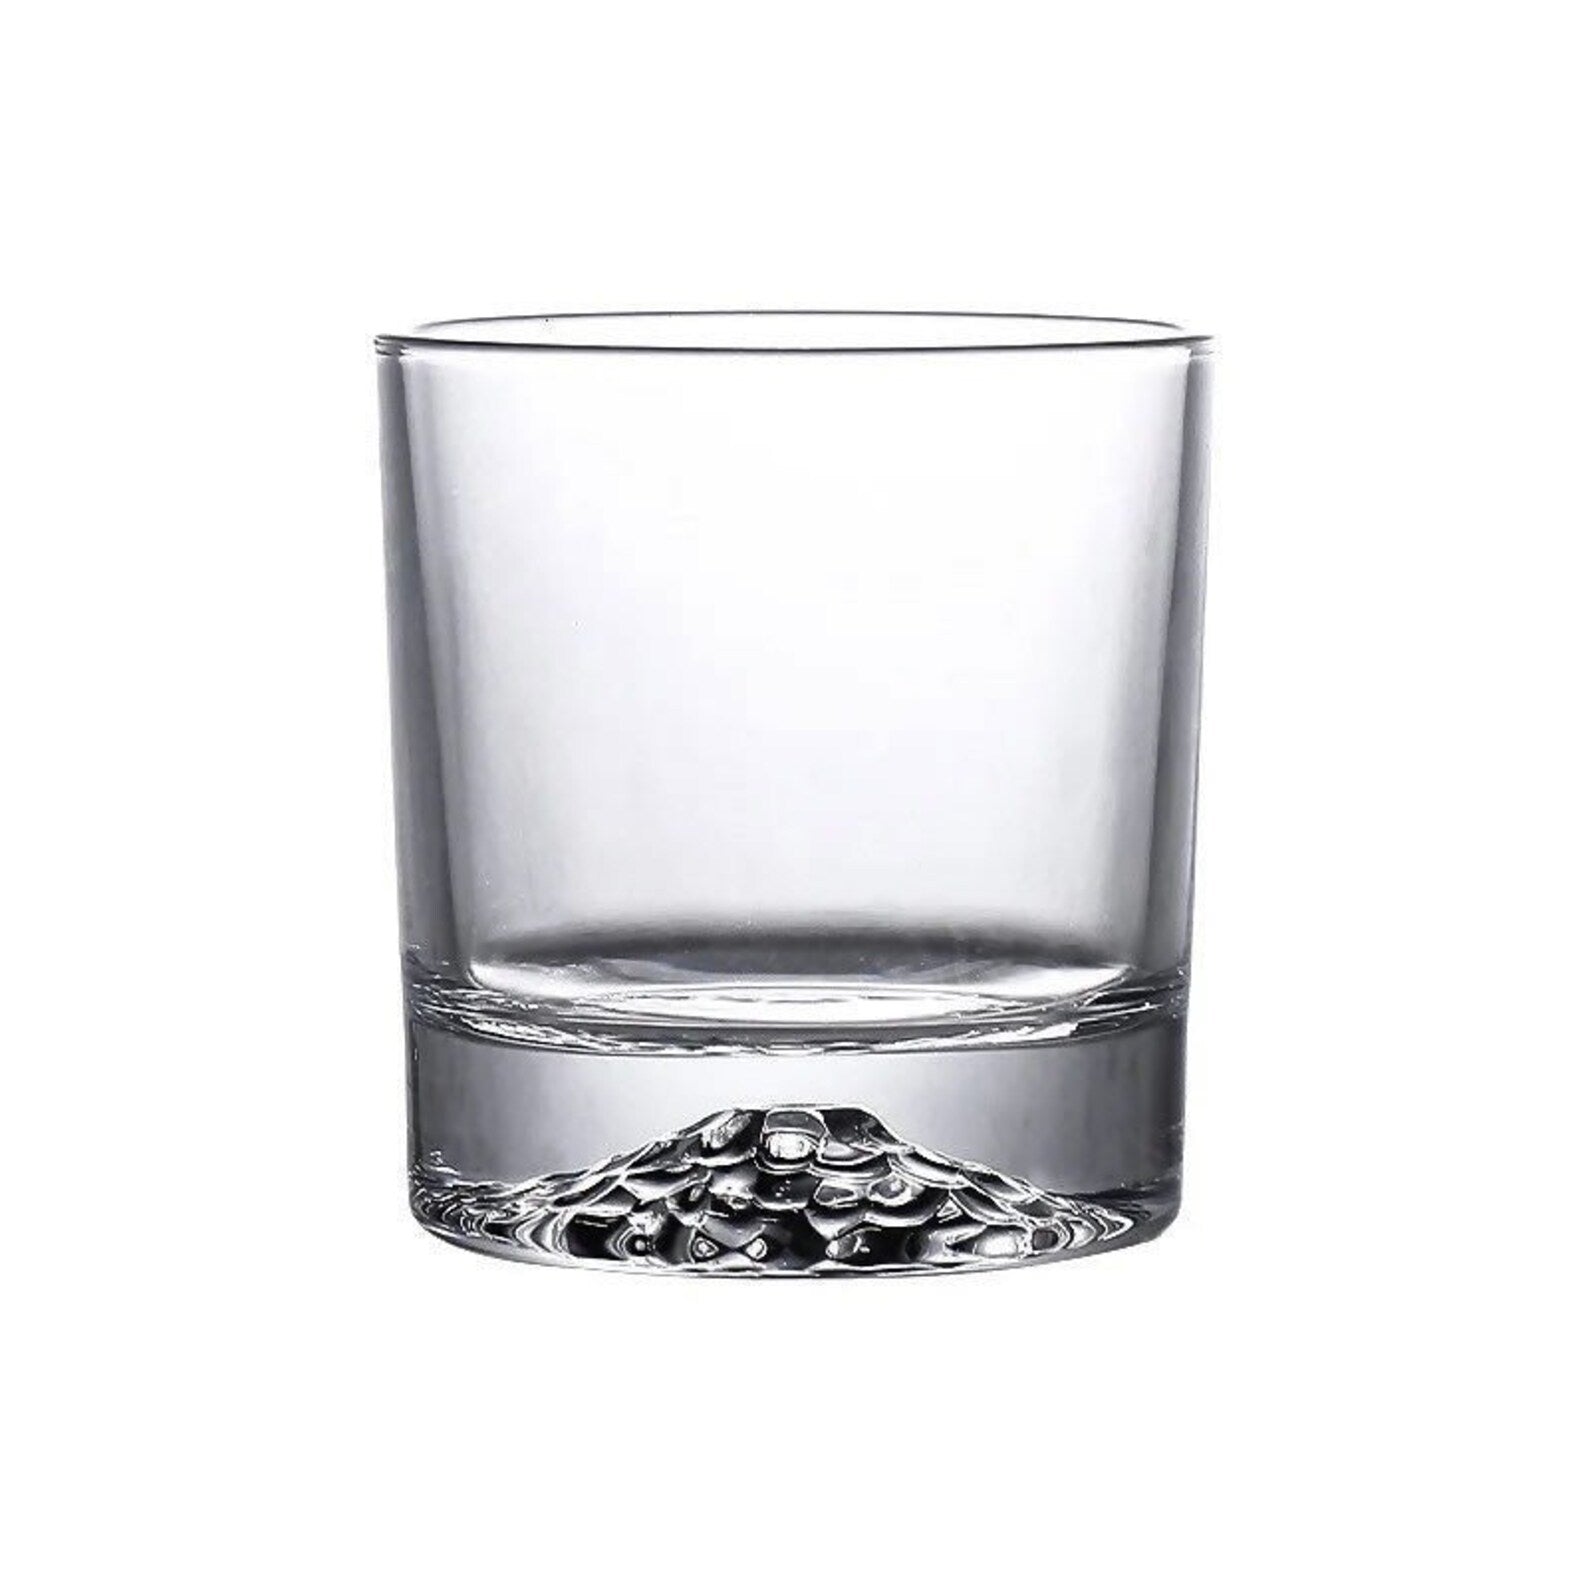 Whiskey Glass Gps Coordinates Whiskey Glass Travel Glass Whiskey Glass  Engagement Wedding Glass for New Home Housewarming Gift 